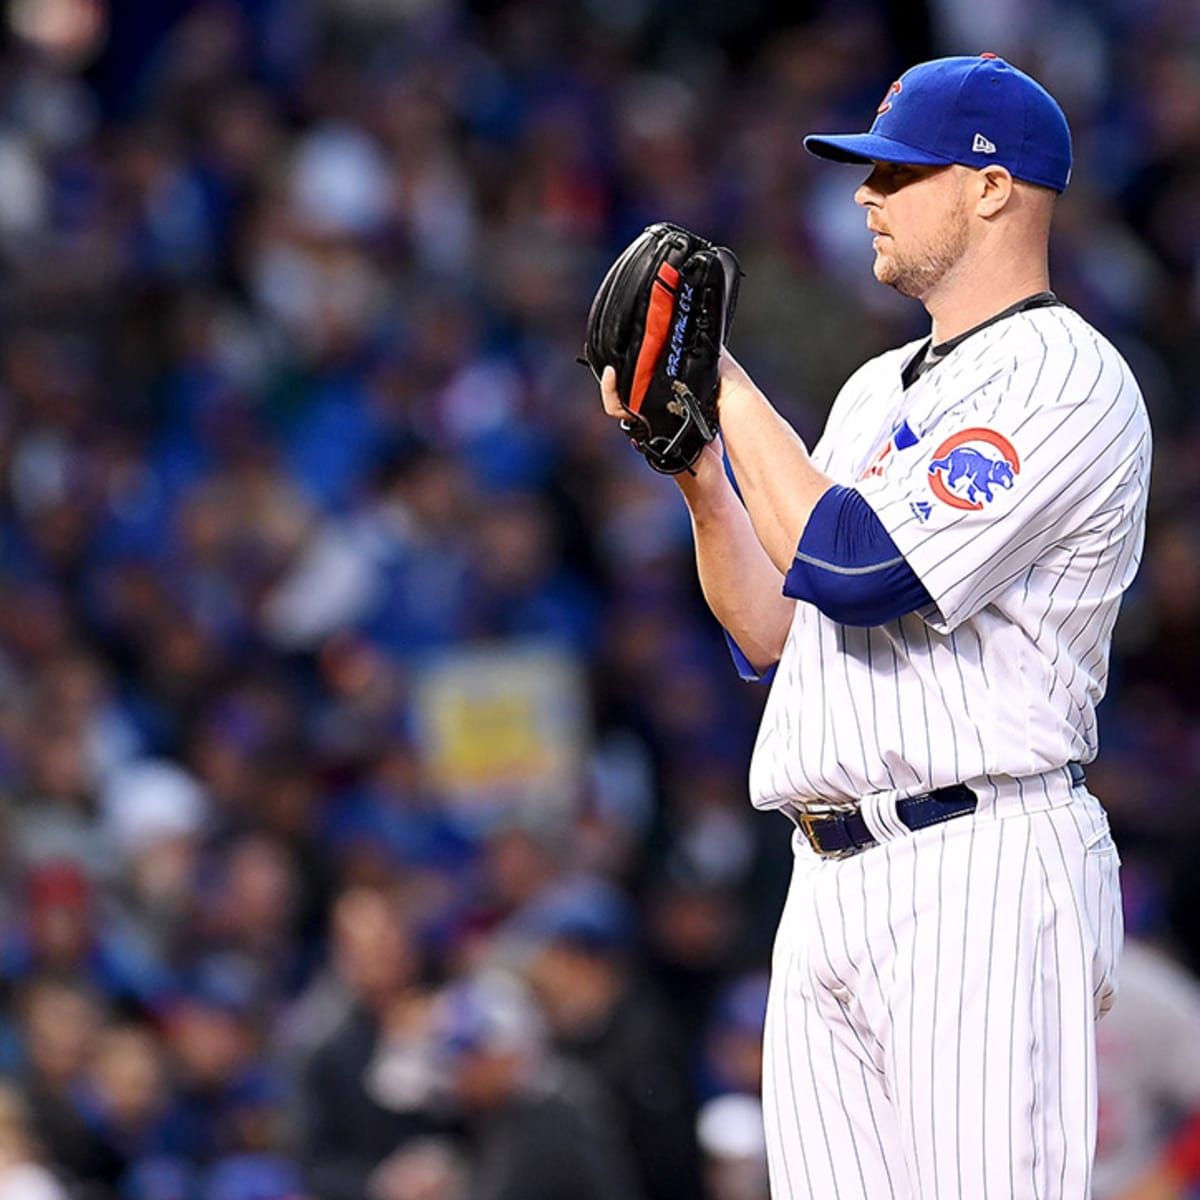 Jon Lester conquered the yips once more in NLDS Game 4 - Sports Illustrated